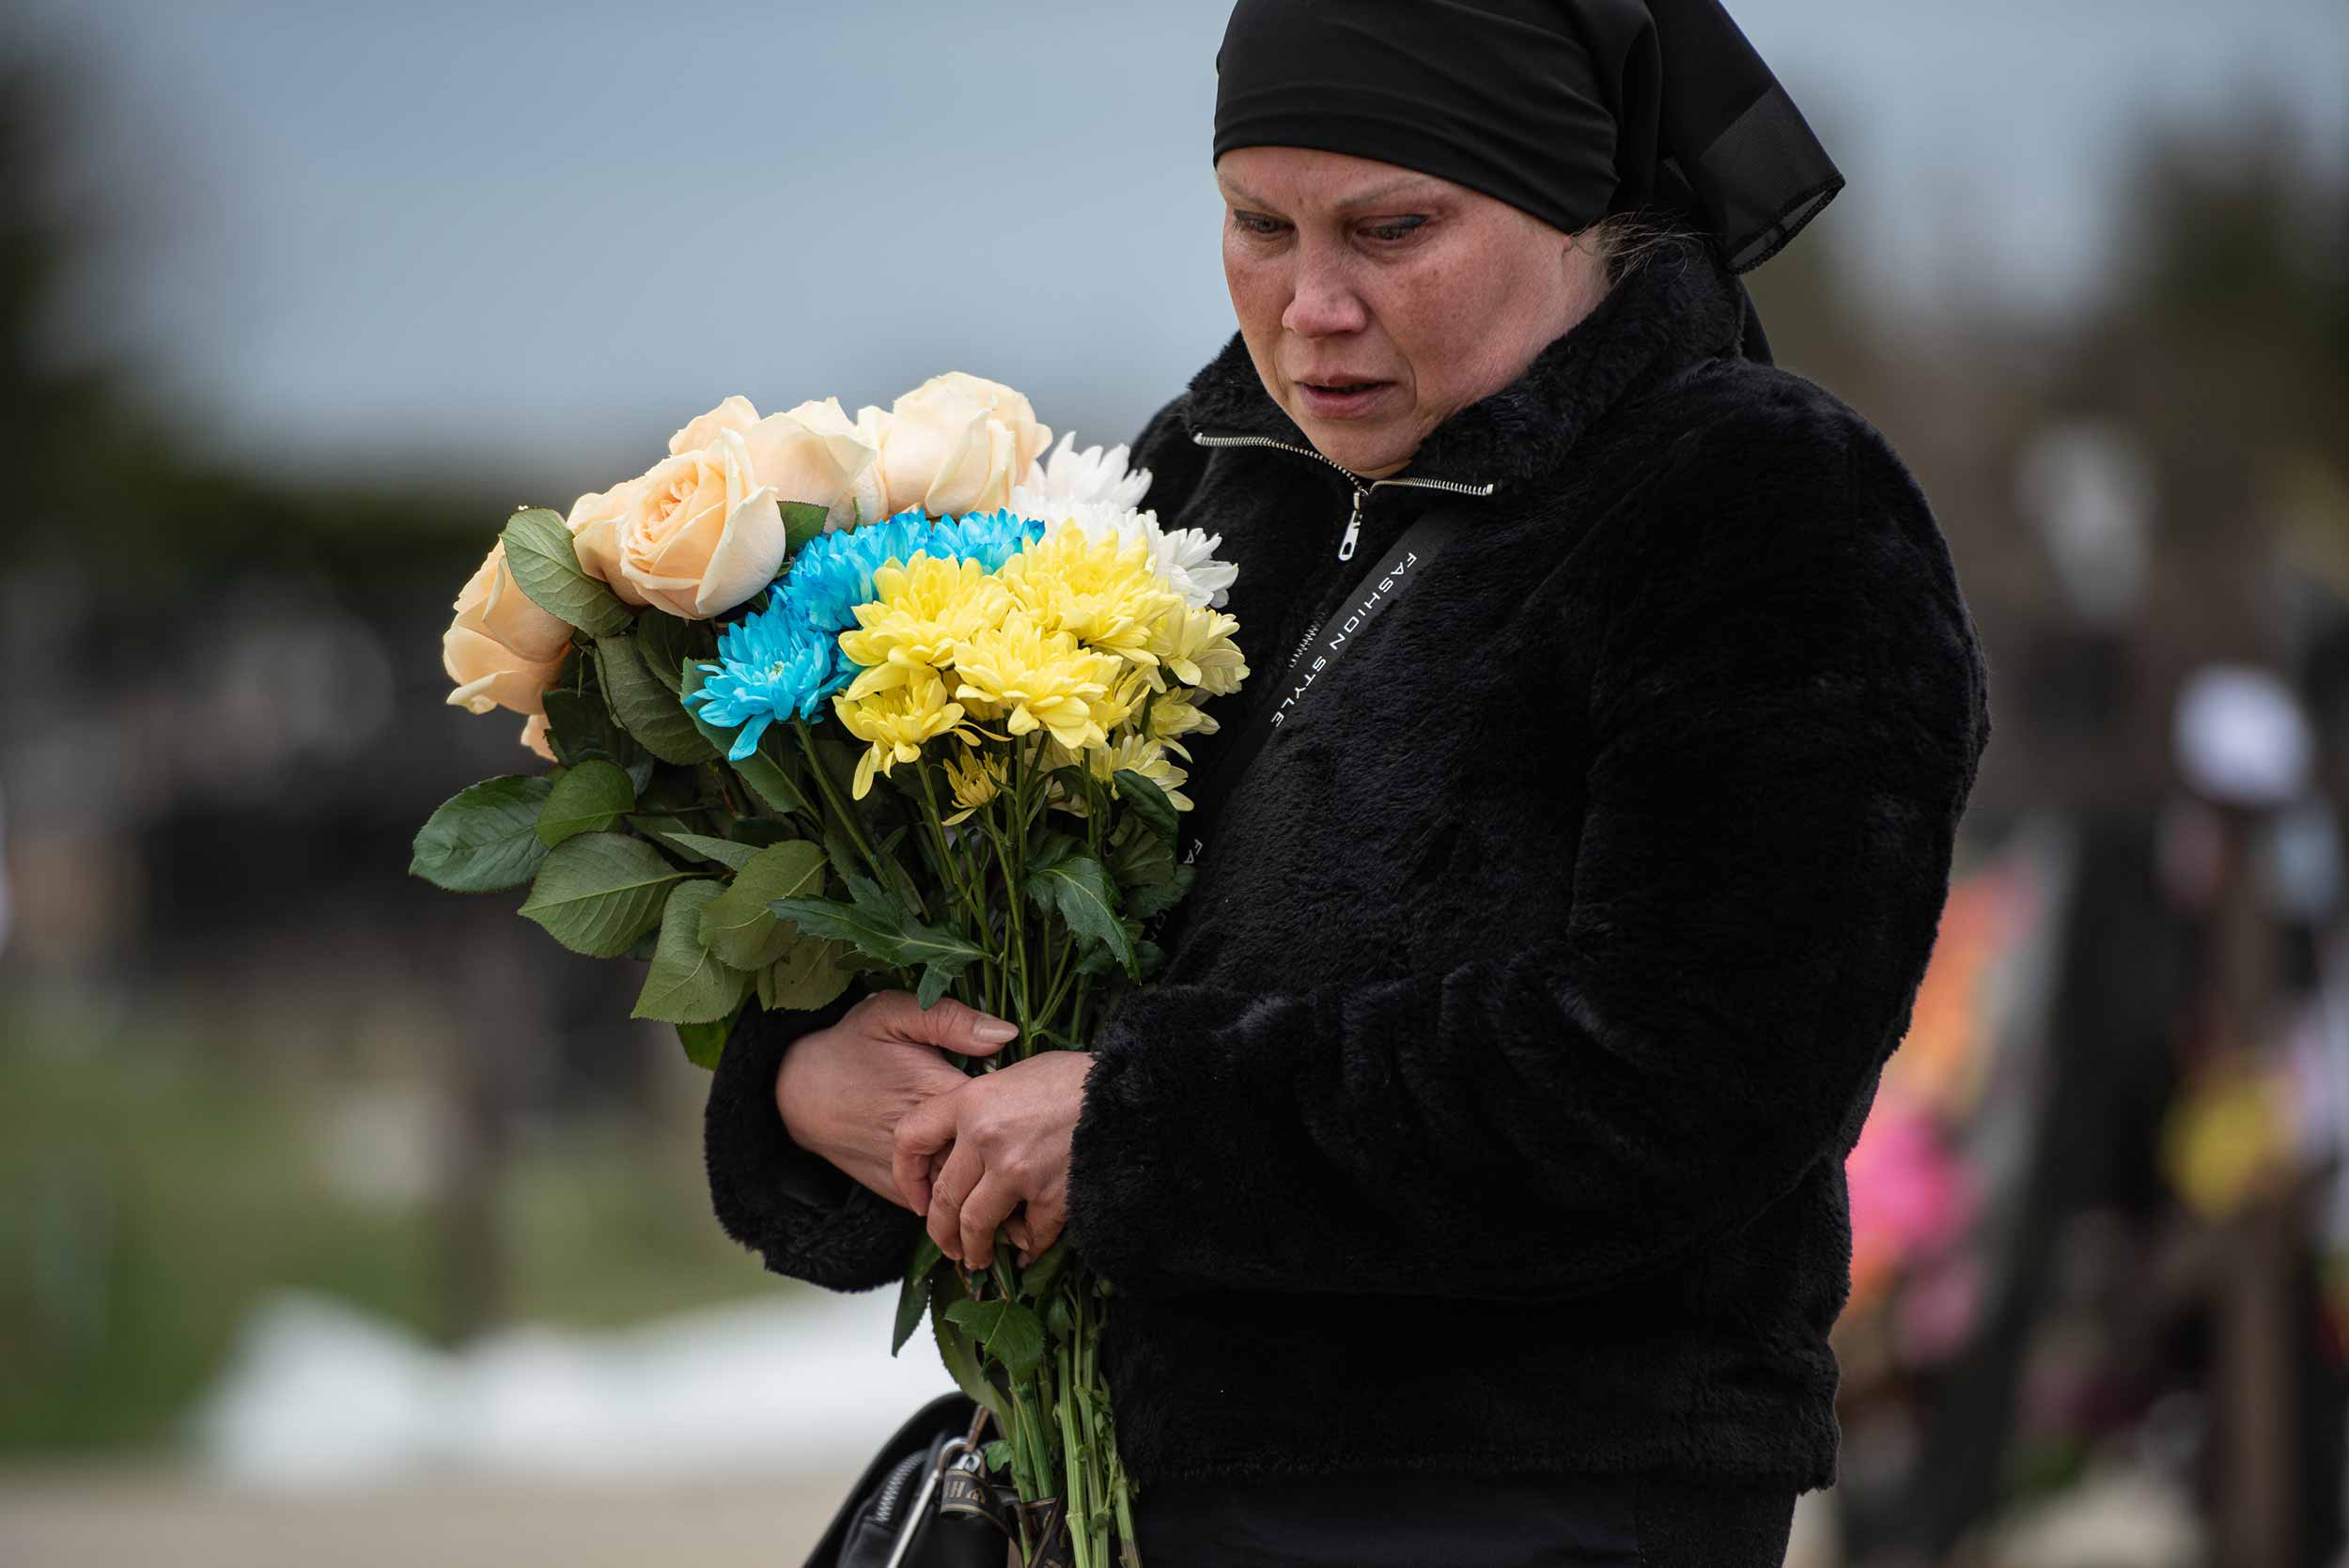 Hanna Hudyna, 43, stands by the grave of her mother Halyna Ponomareva on April 20, 2022 in Hostomel. Halyna Ponomareva was captured by Chechen fighters in Hostomel and was held in a basement as a prisoner. She died there after being held captive for 17 days. © Alexey Furman/Getty Images